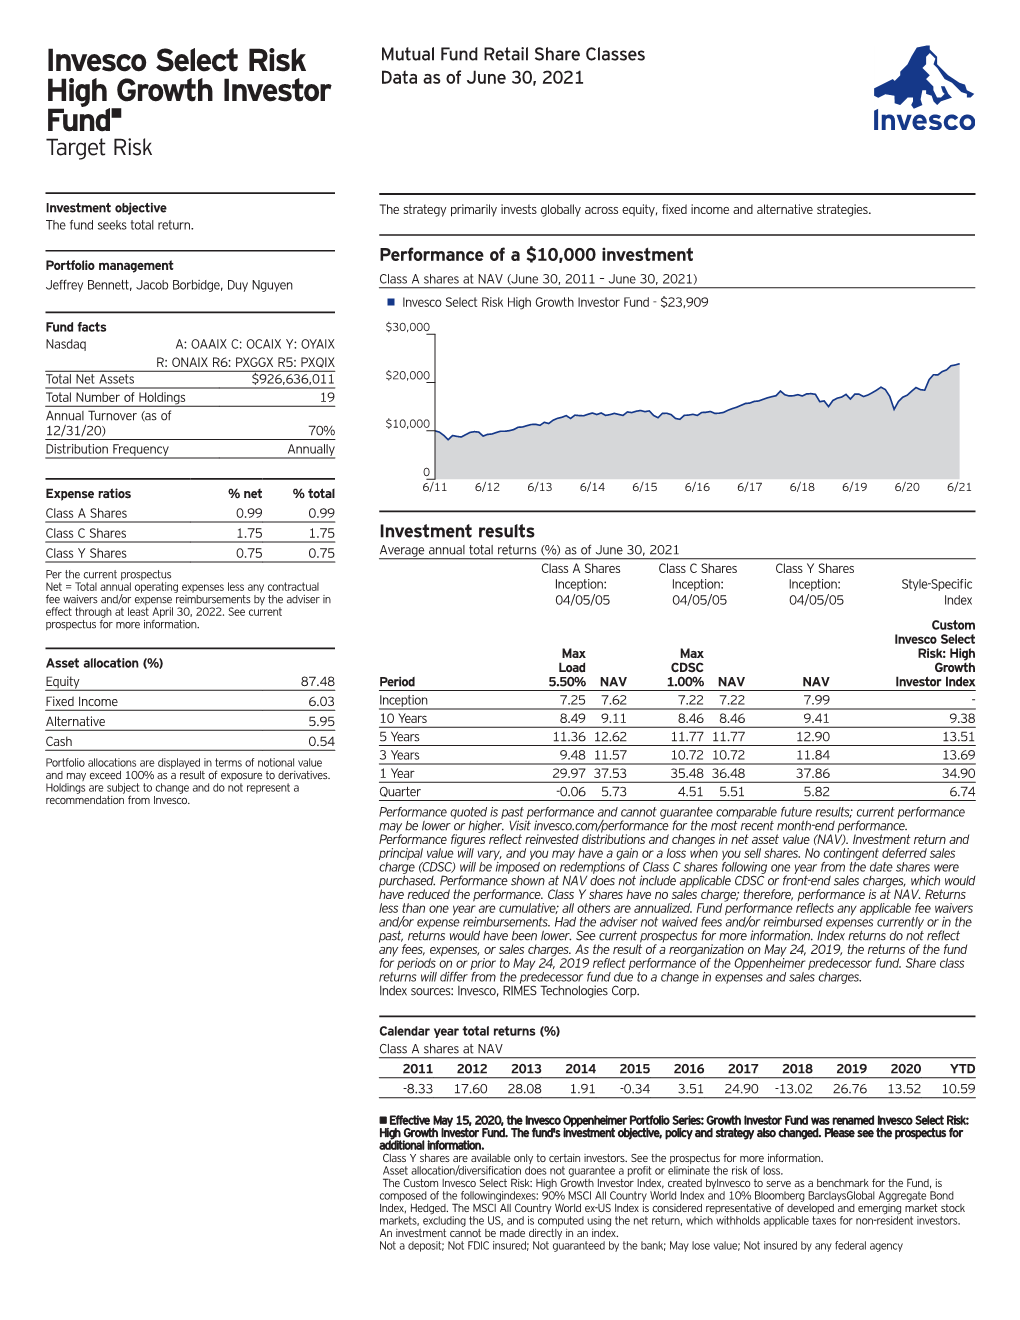 Invesco Select Risk: High Growth Investor Fund Fact Sheet